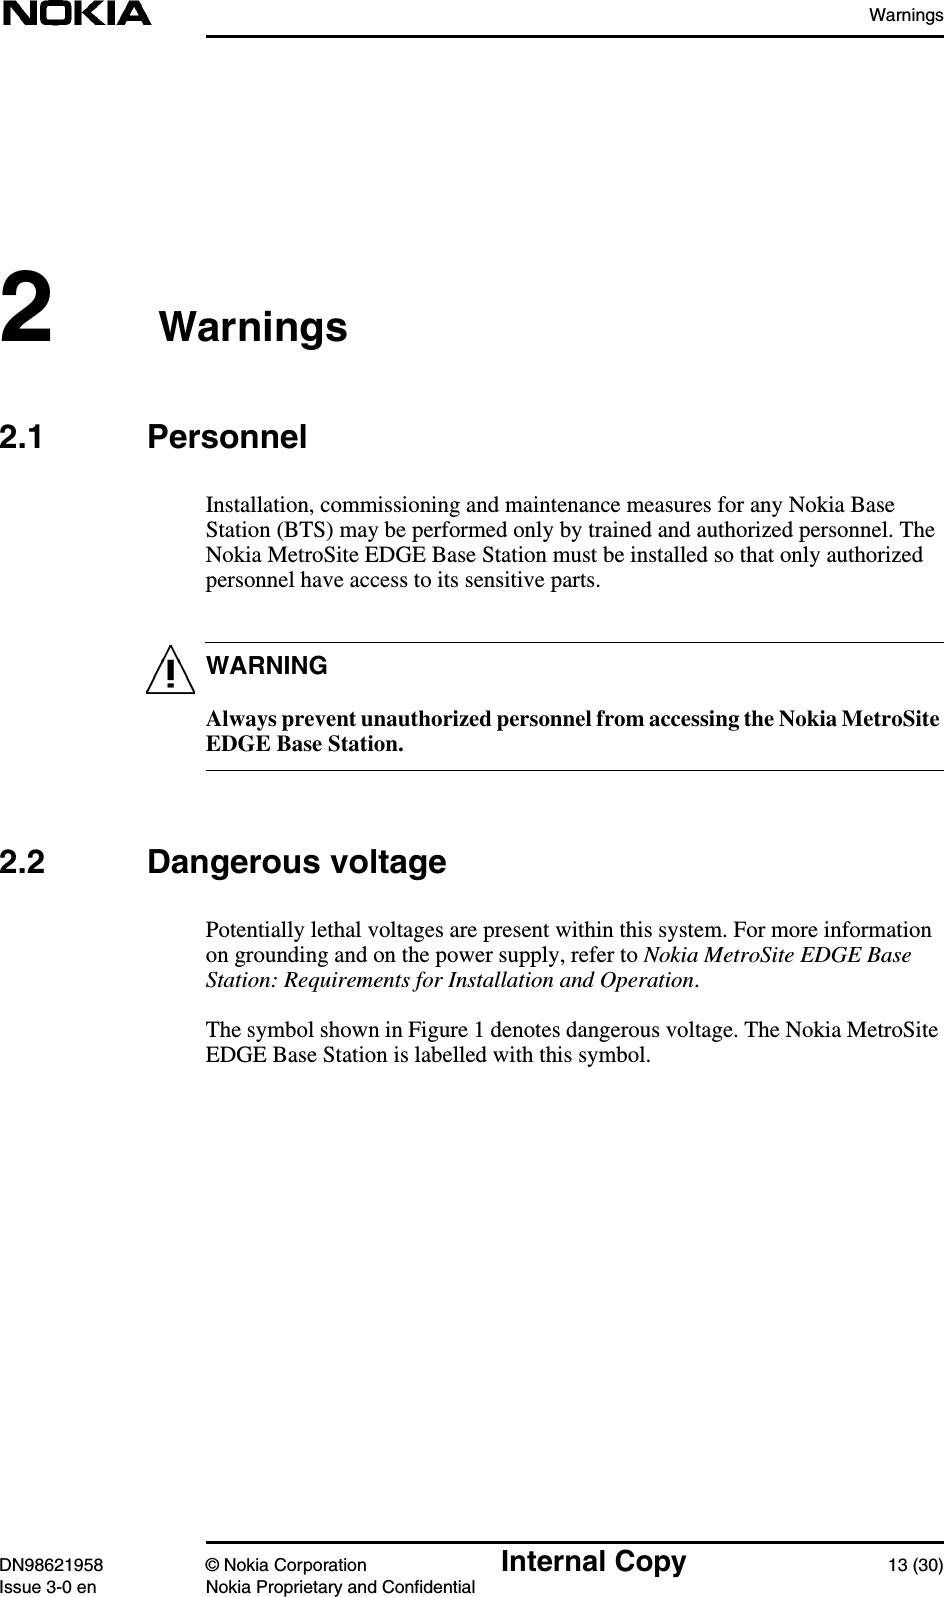 WarningsDN98621958 © Nokia Corporation Internal Copy 13 (30)Issue 3-0 en Nokia Proprietary and ConfidentialWARNING2 Warnings2.1 PersonnelInstallation, commissioning and maintenance measures for any Nokia BaseStation (BTS) may be performed only by trained and authorized personnel. TheNokia MetroSite EDGE Base Station must be installed so that only authorizedpersonnel have access to its sensitive parts.Always prevent unauthorized personnel from accessing the Nokia MetroSiteEDGE Base Station.2.2 Dangerous voltagePotentially lethal voltages are present within this system. For more informationon grounding and on the power supply, refer to Nokia MetroSite EDGE BaseStation: Requirements for Installation and Operation.The symbol shown in Figure 1 denotes dangerous voltage. The Nokia MetroSiteEDGE Base Station is labelled with this symbol.